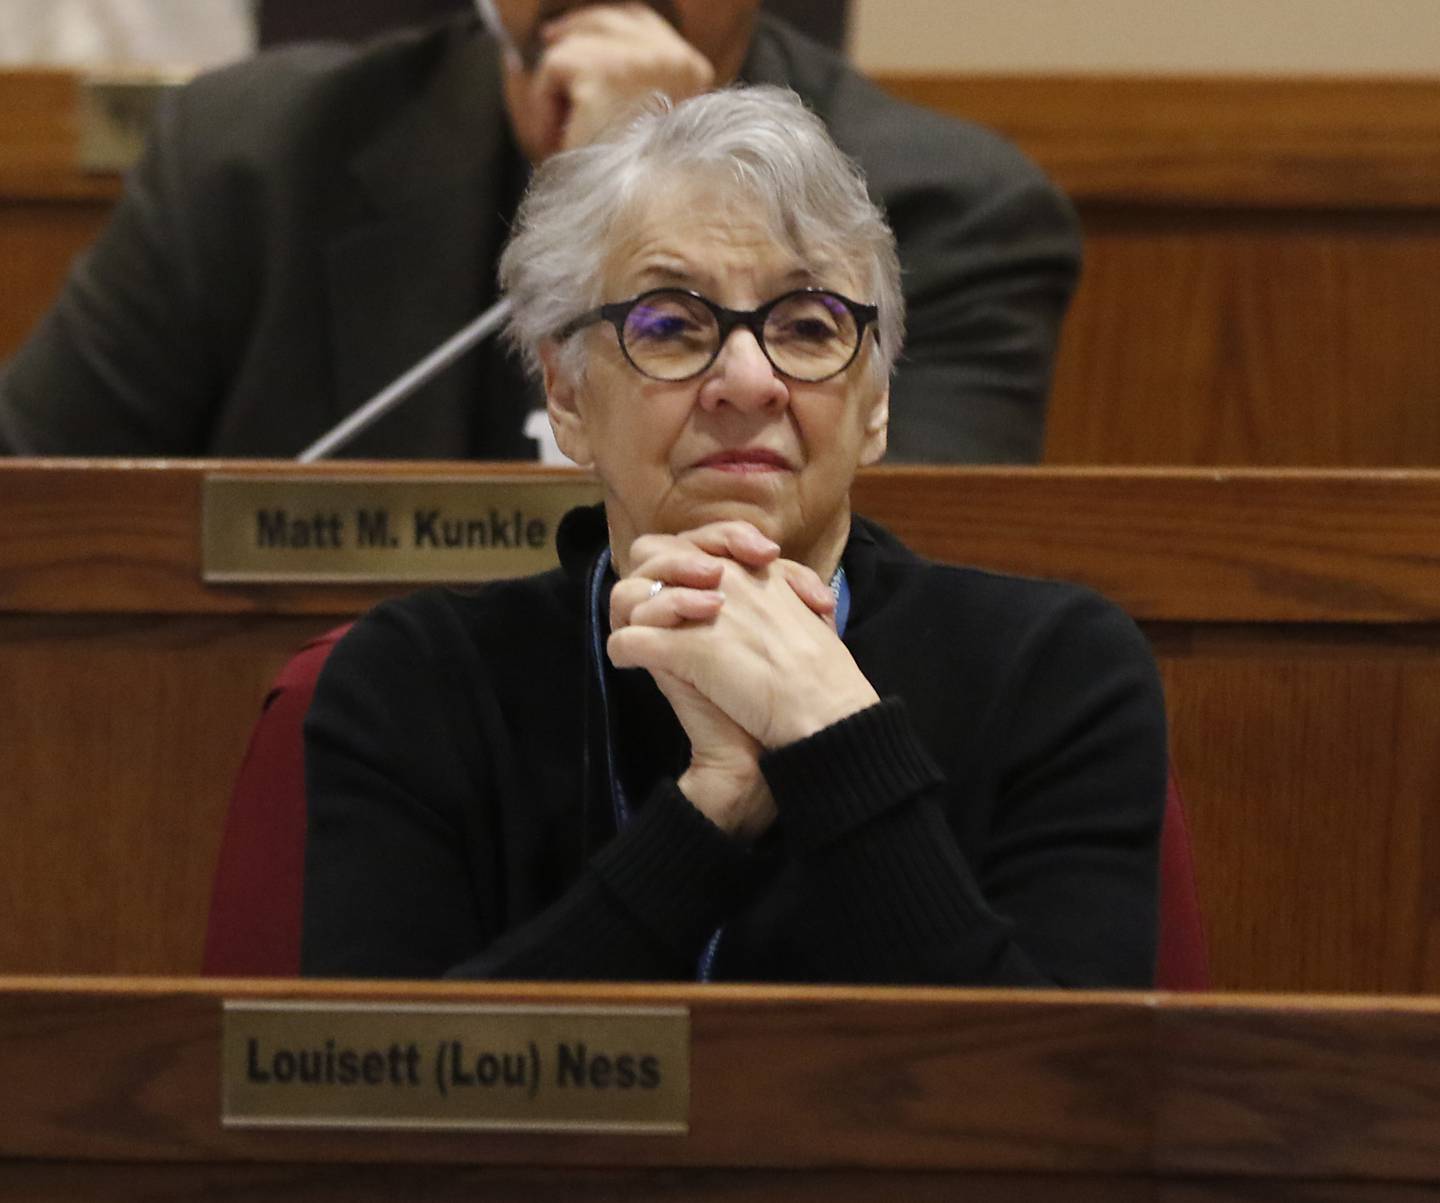 McHenry County Board member Louisett (Lou) Ness listens to a speaker during a McHenry County Board Committee of the Whole meeting Thursday, Dec. 15, 2022, in the McHenry County Administration Building in Woodstock.